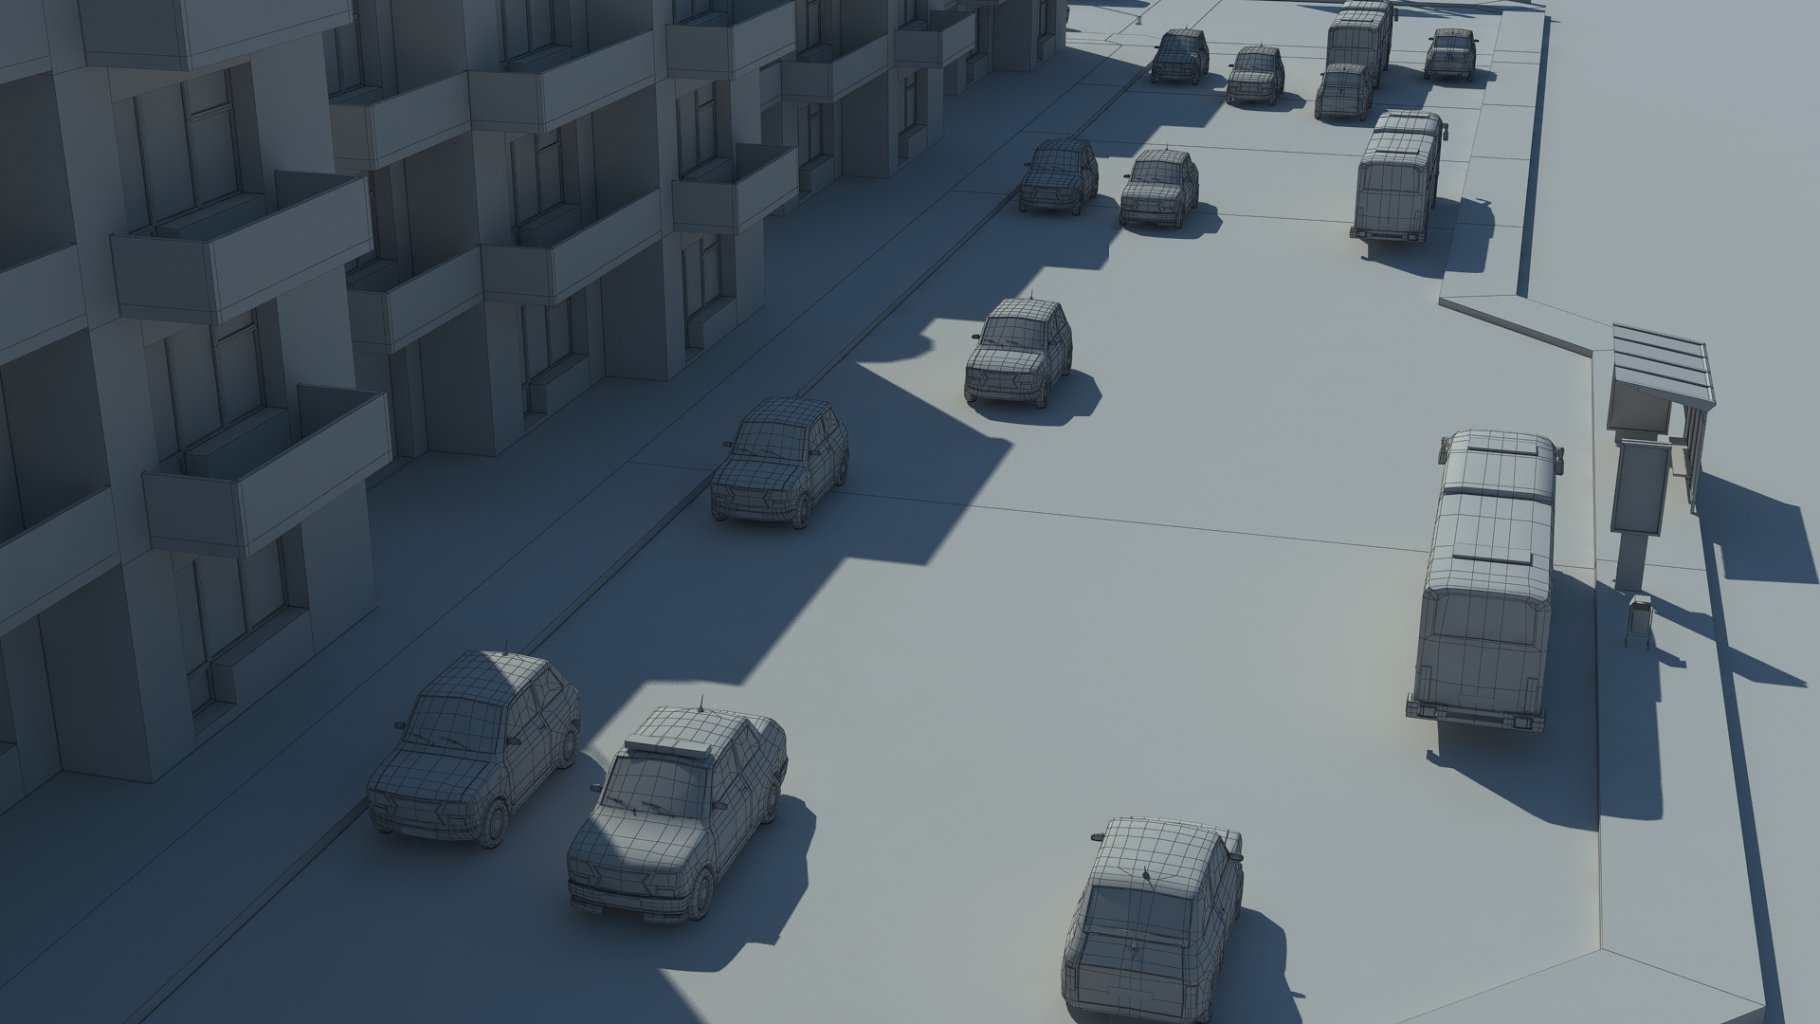 Rendering of a wonderful low-poly city 3d model without textures